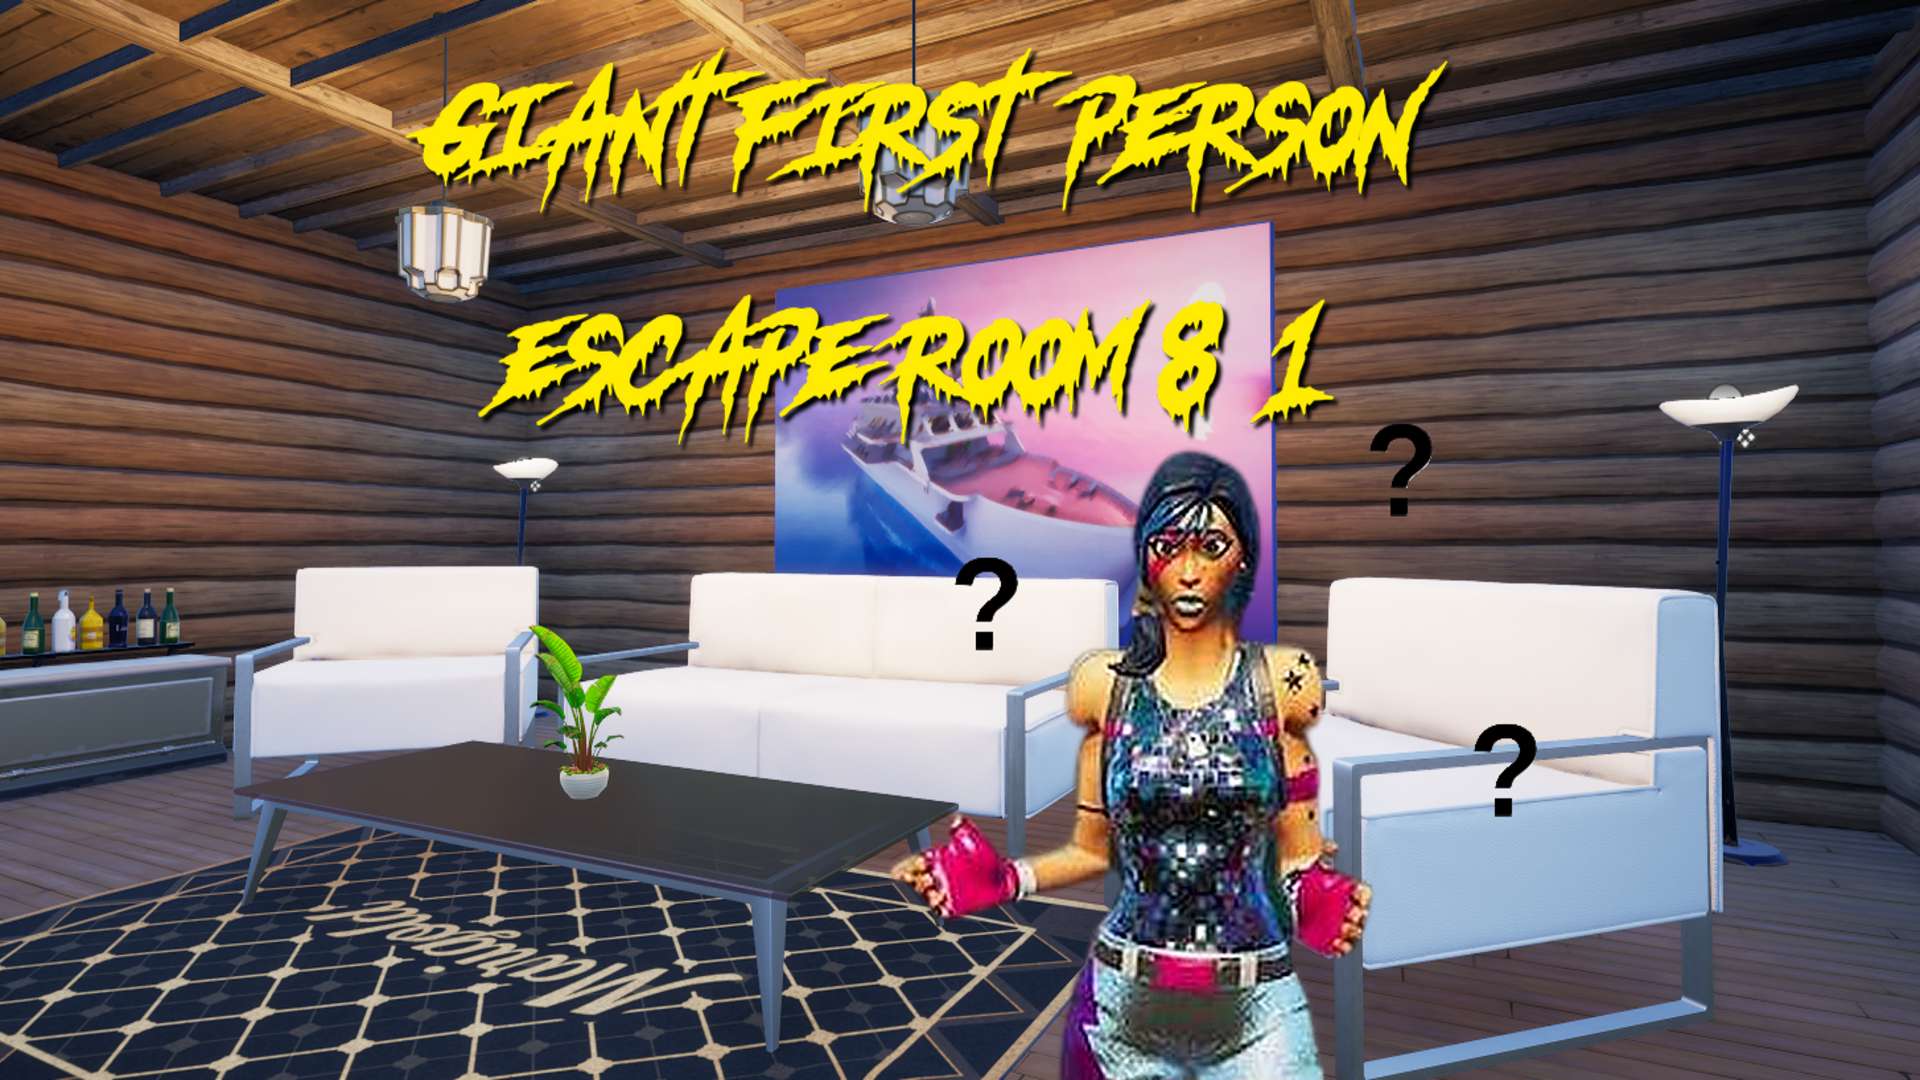 GIANT ESCAPE ROOM 8 FIRST PERSON